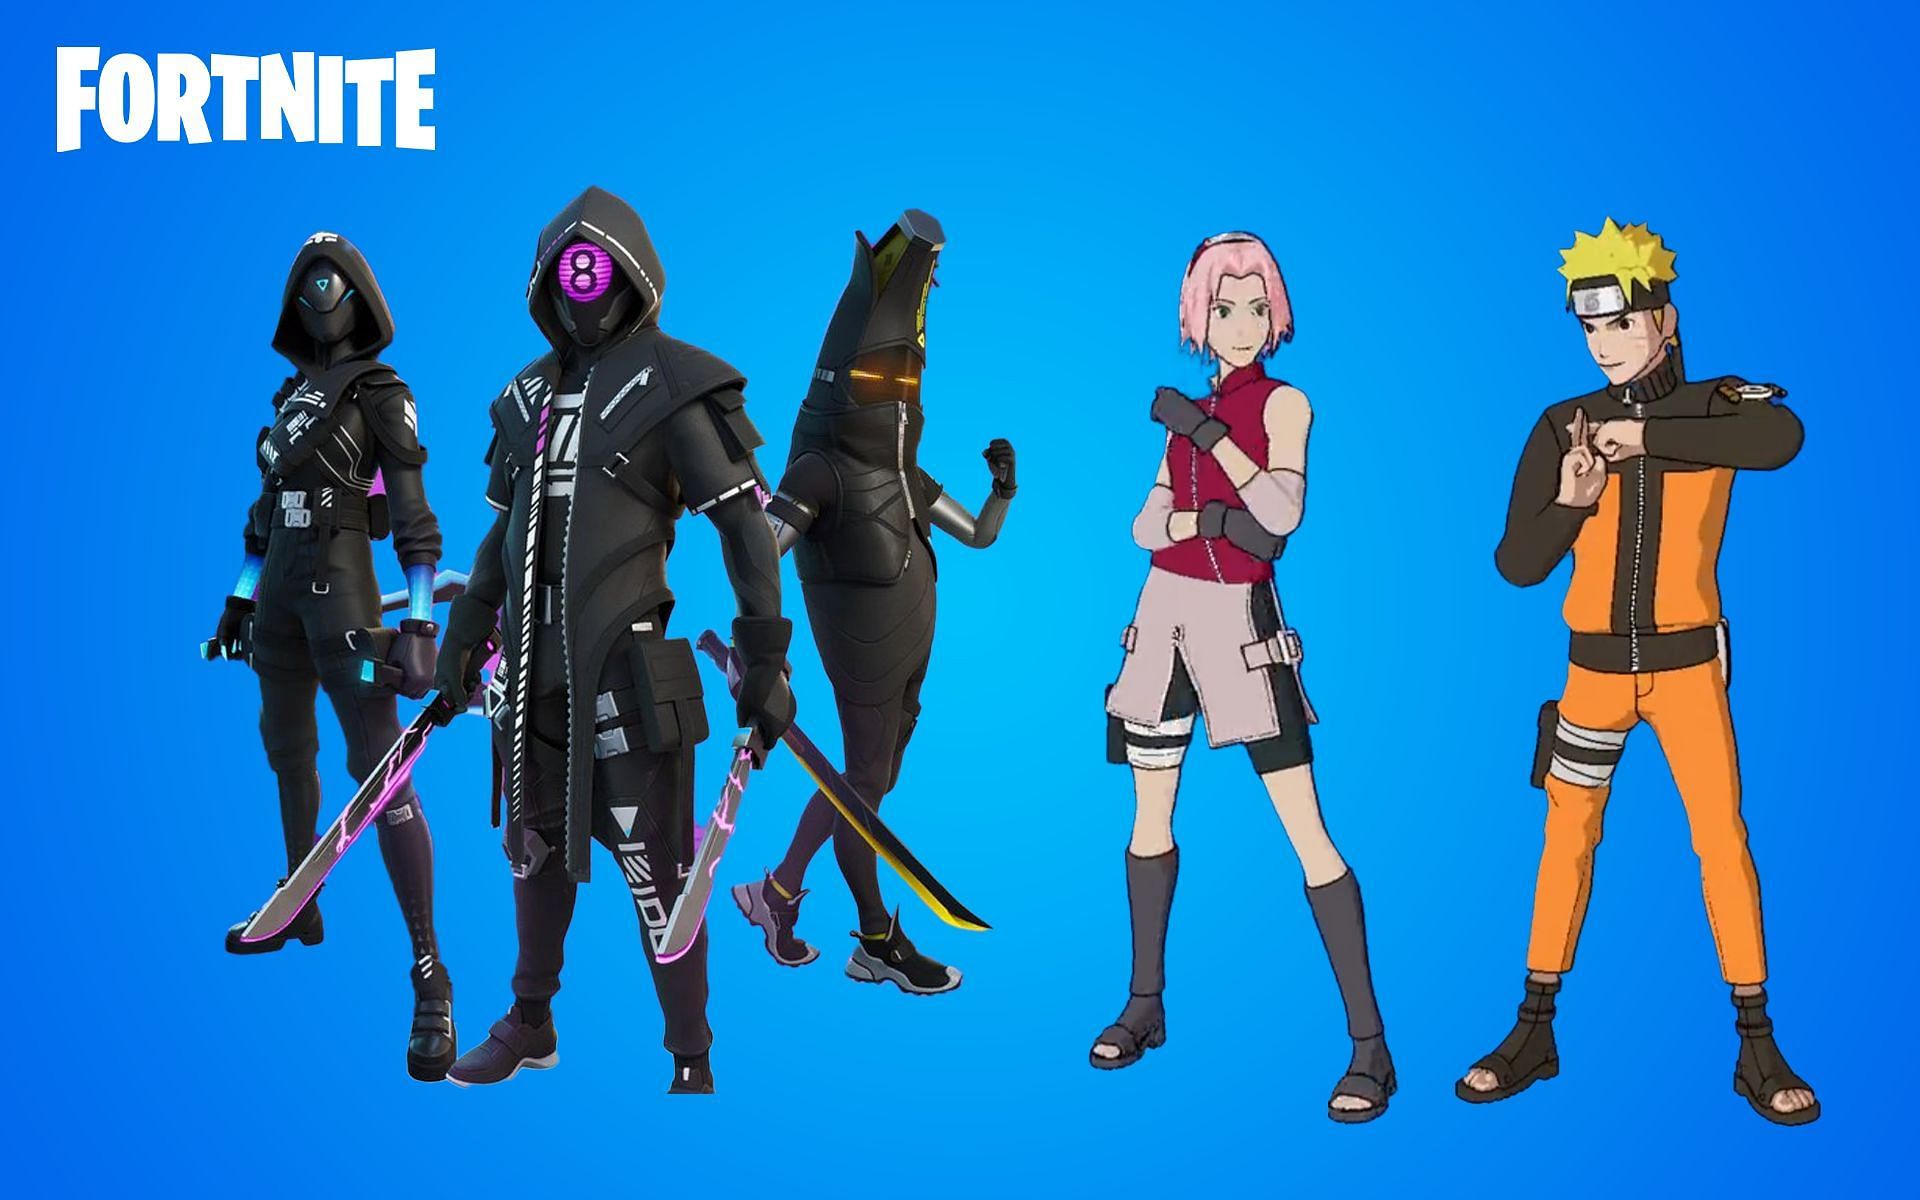 Here are all the new cosmetics coming with the Fortnite v18.40 update (Image via Sportskeeda)